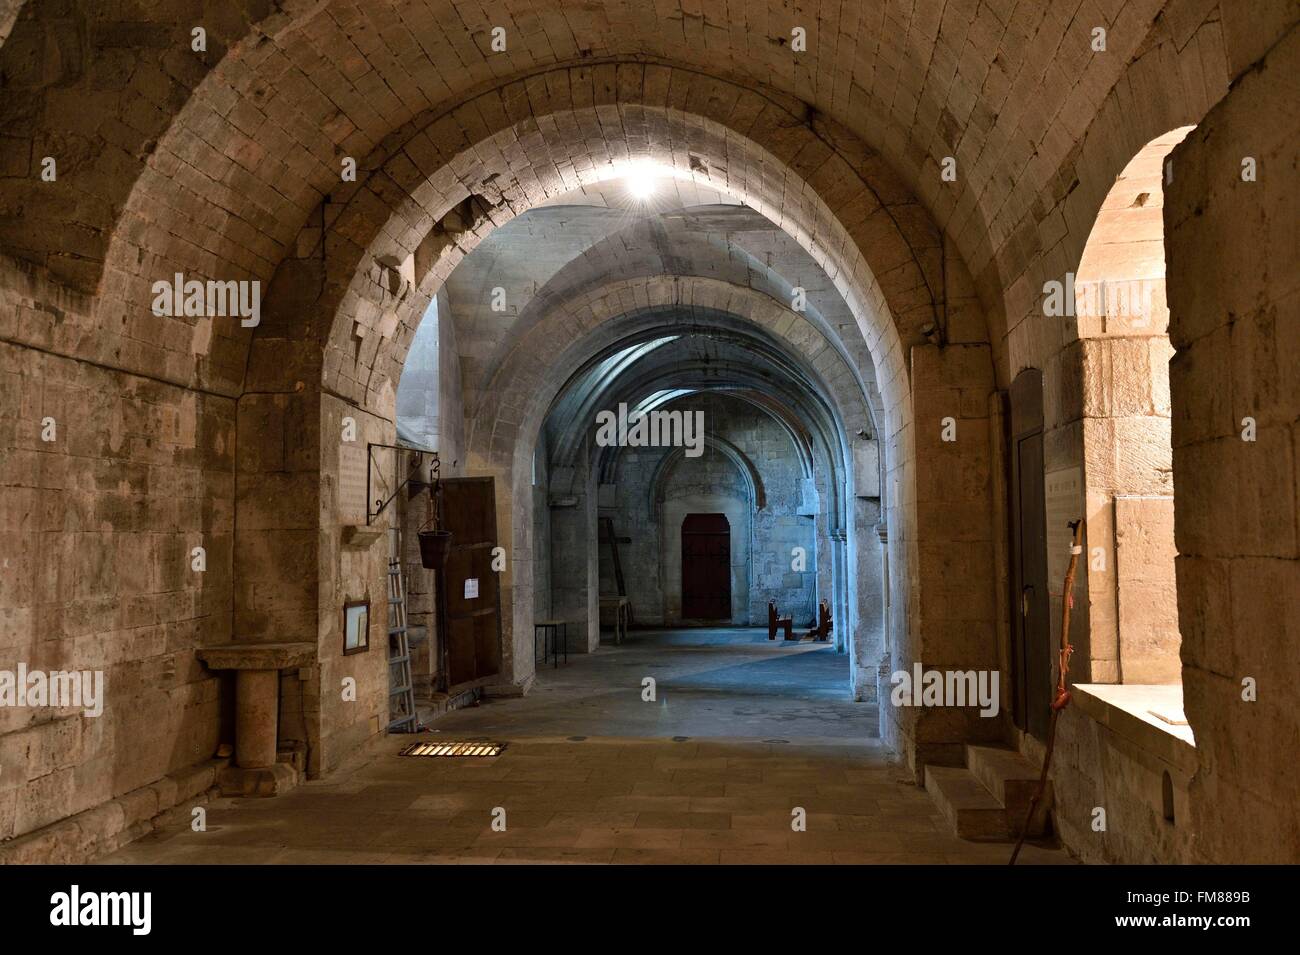 France, Gard, Saint Gilles, 12th-13th century abbey, listed as World Heritage by UNESCO under the road to St Jacques de Compostela in France, Provencal Romanesque style, the crypt Stock Photo